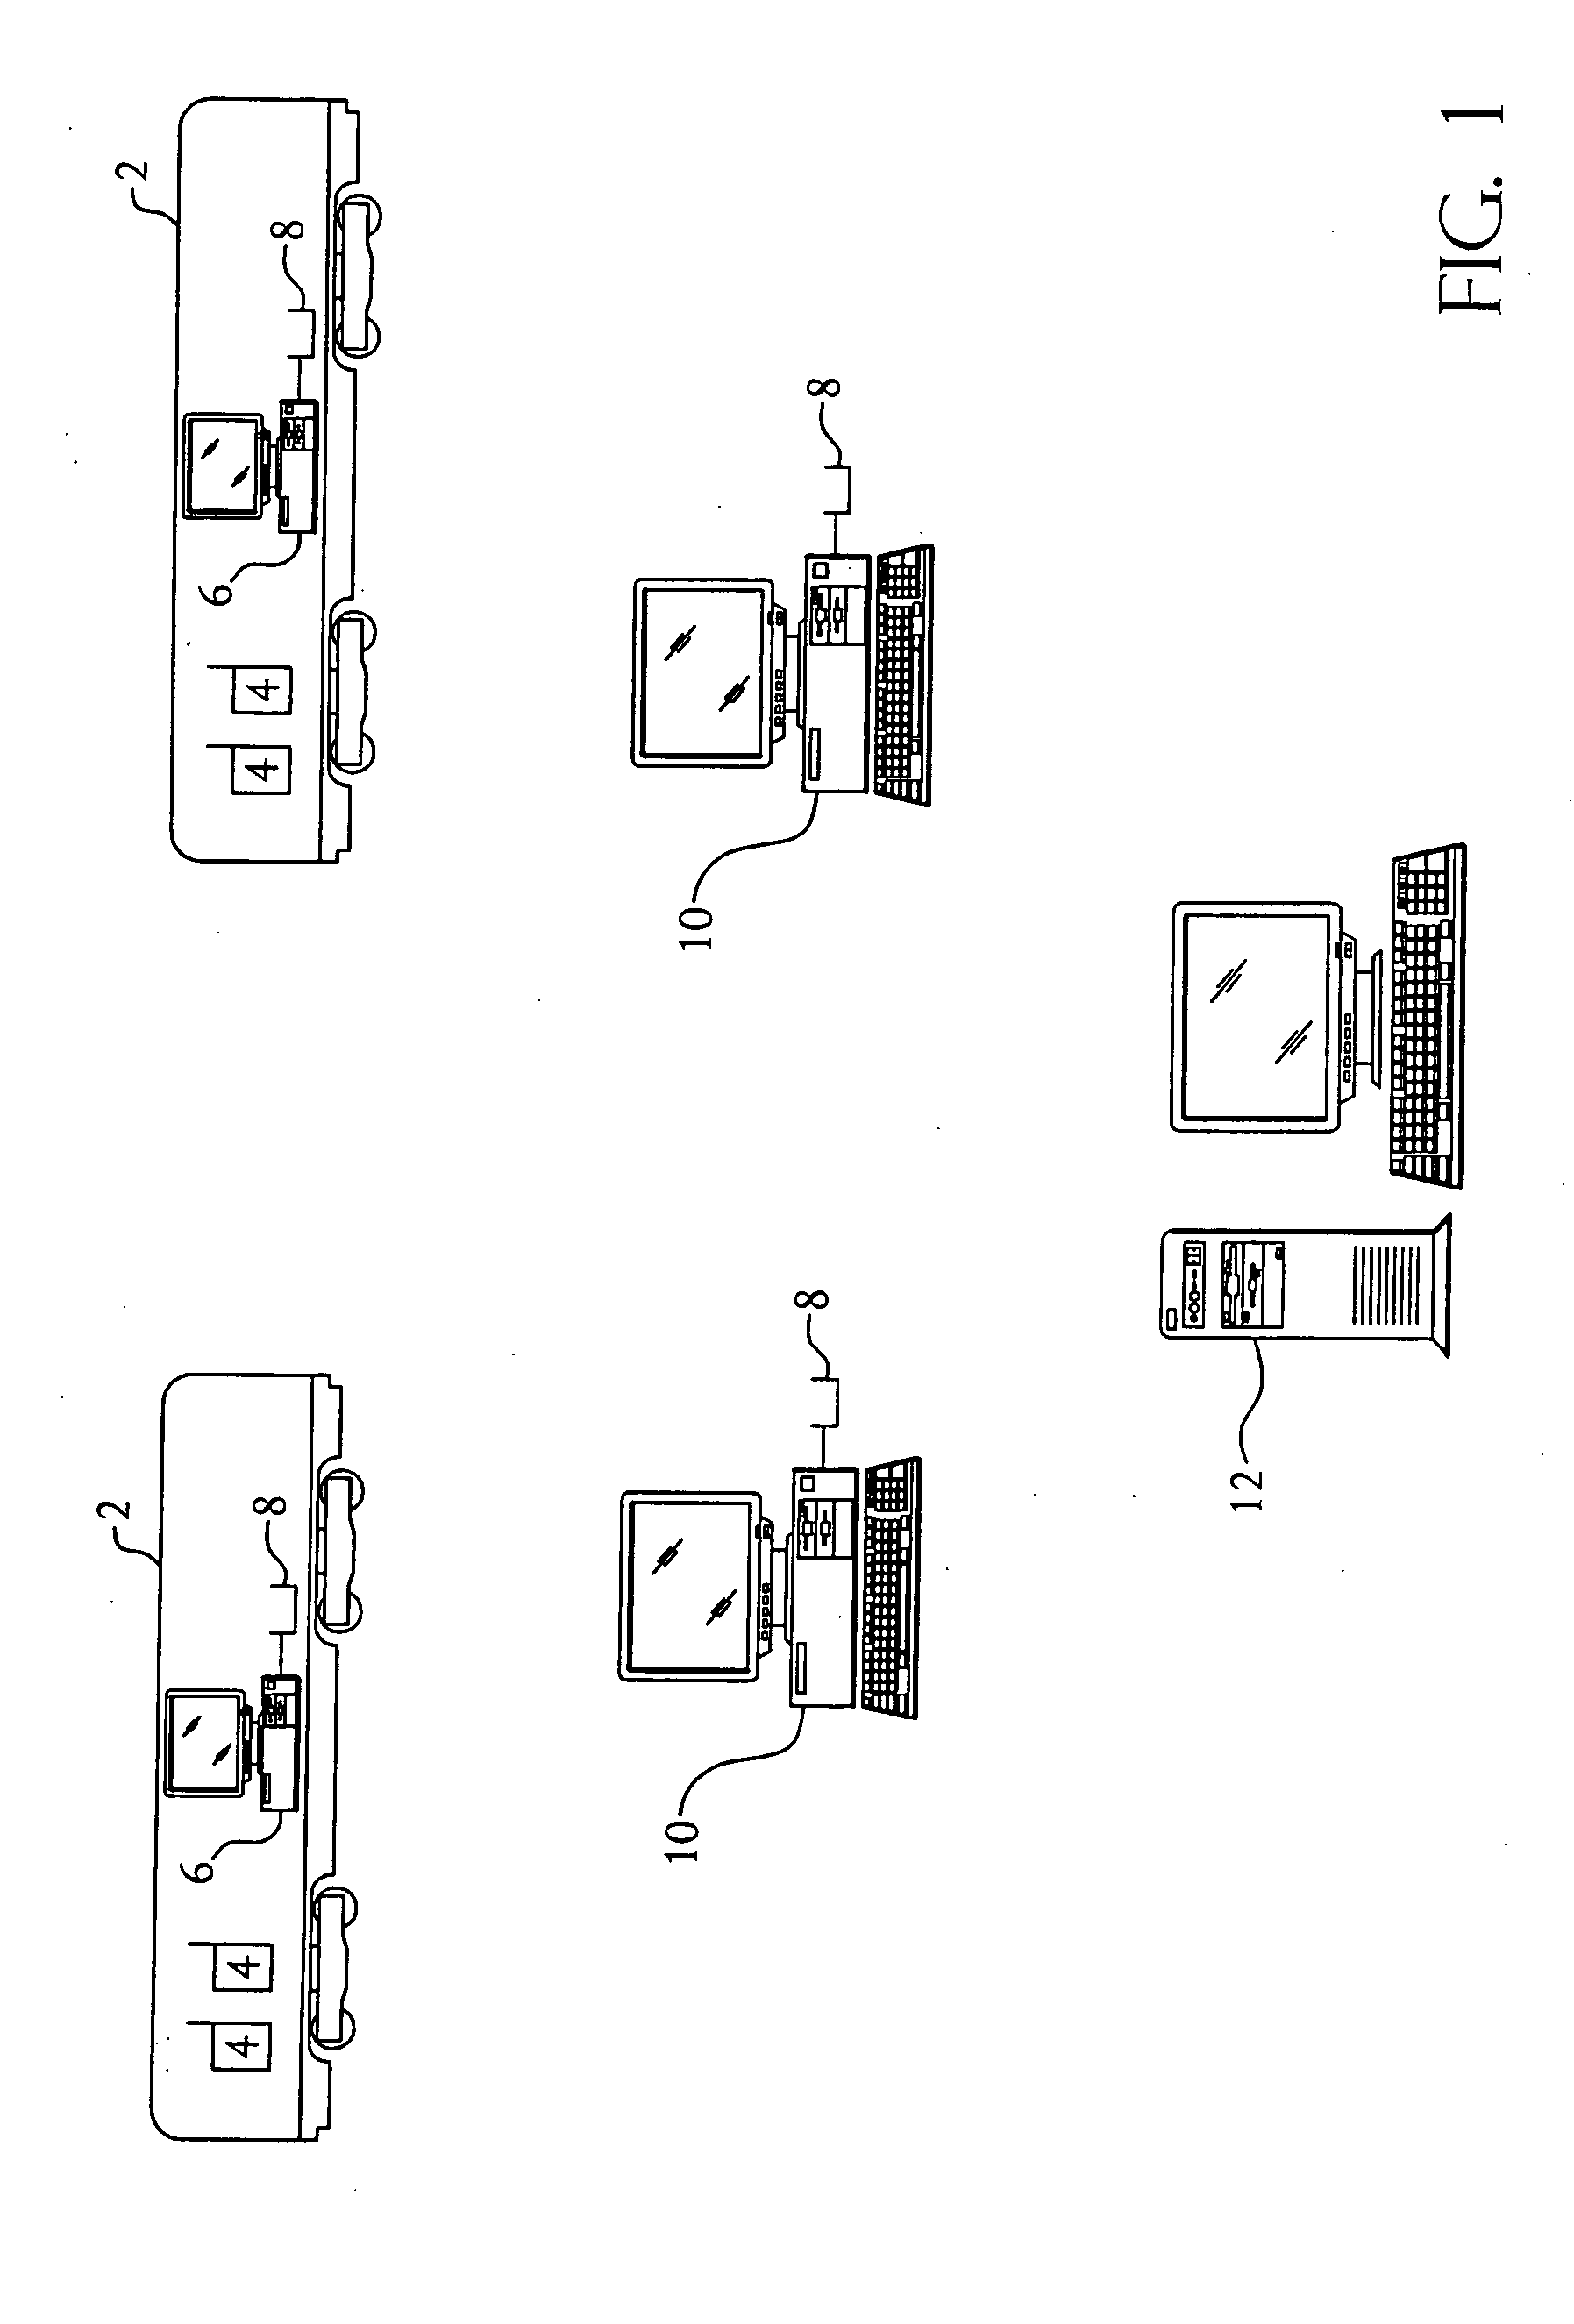 Automated ticket collection system and method of collecting ticket information